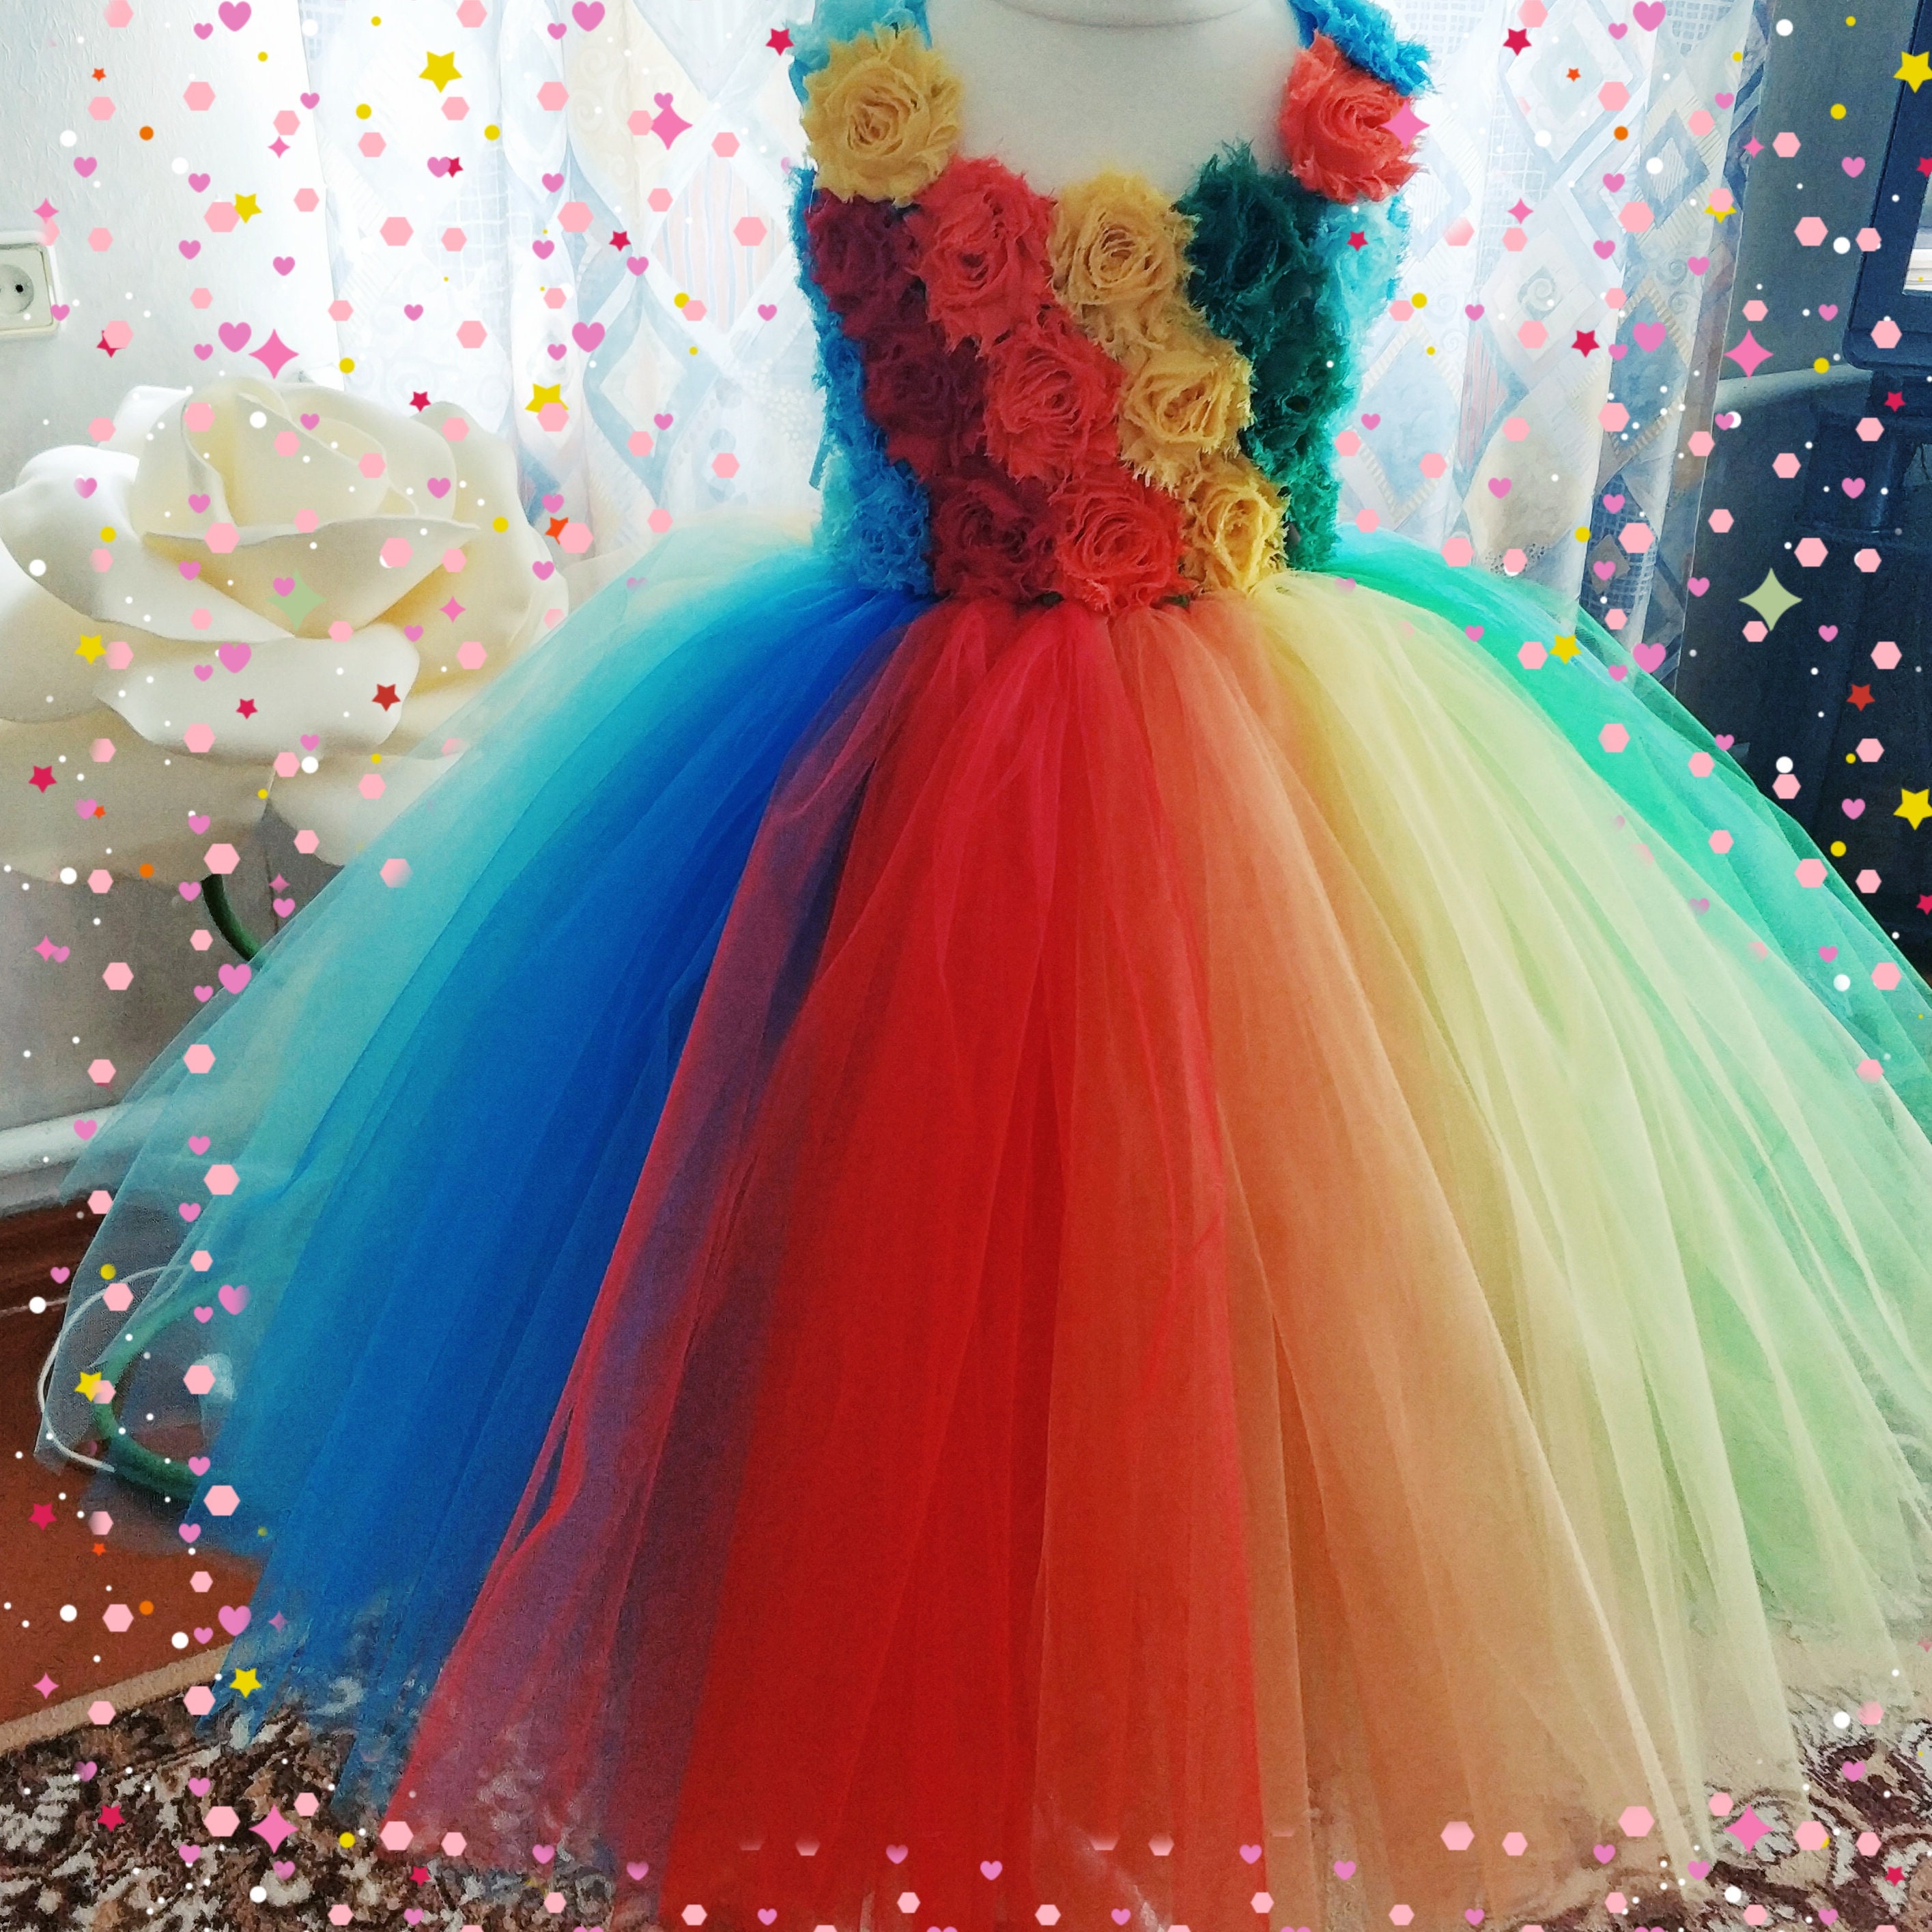 2020 Cute Colorful Women Tulle Robes Rainbow Tulle Dresses Bridal Maternity  Ruffled Tulle Dress Long Sleeve Sheer Party Dress349C